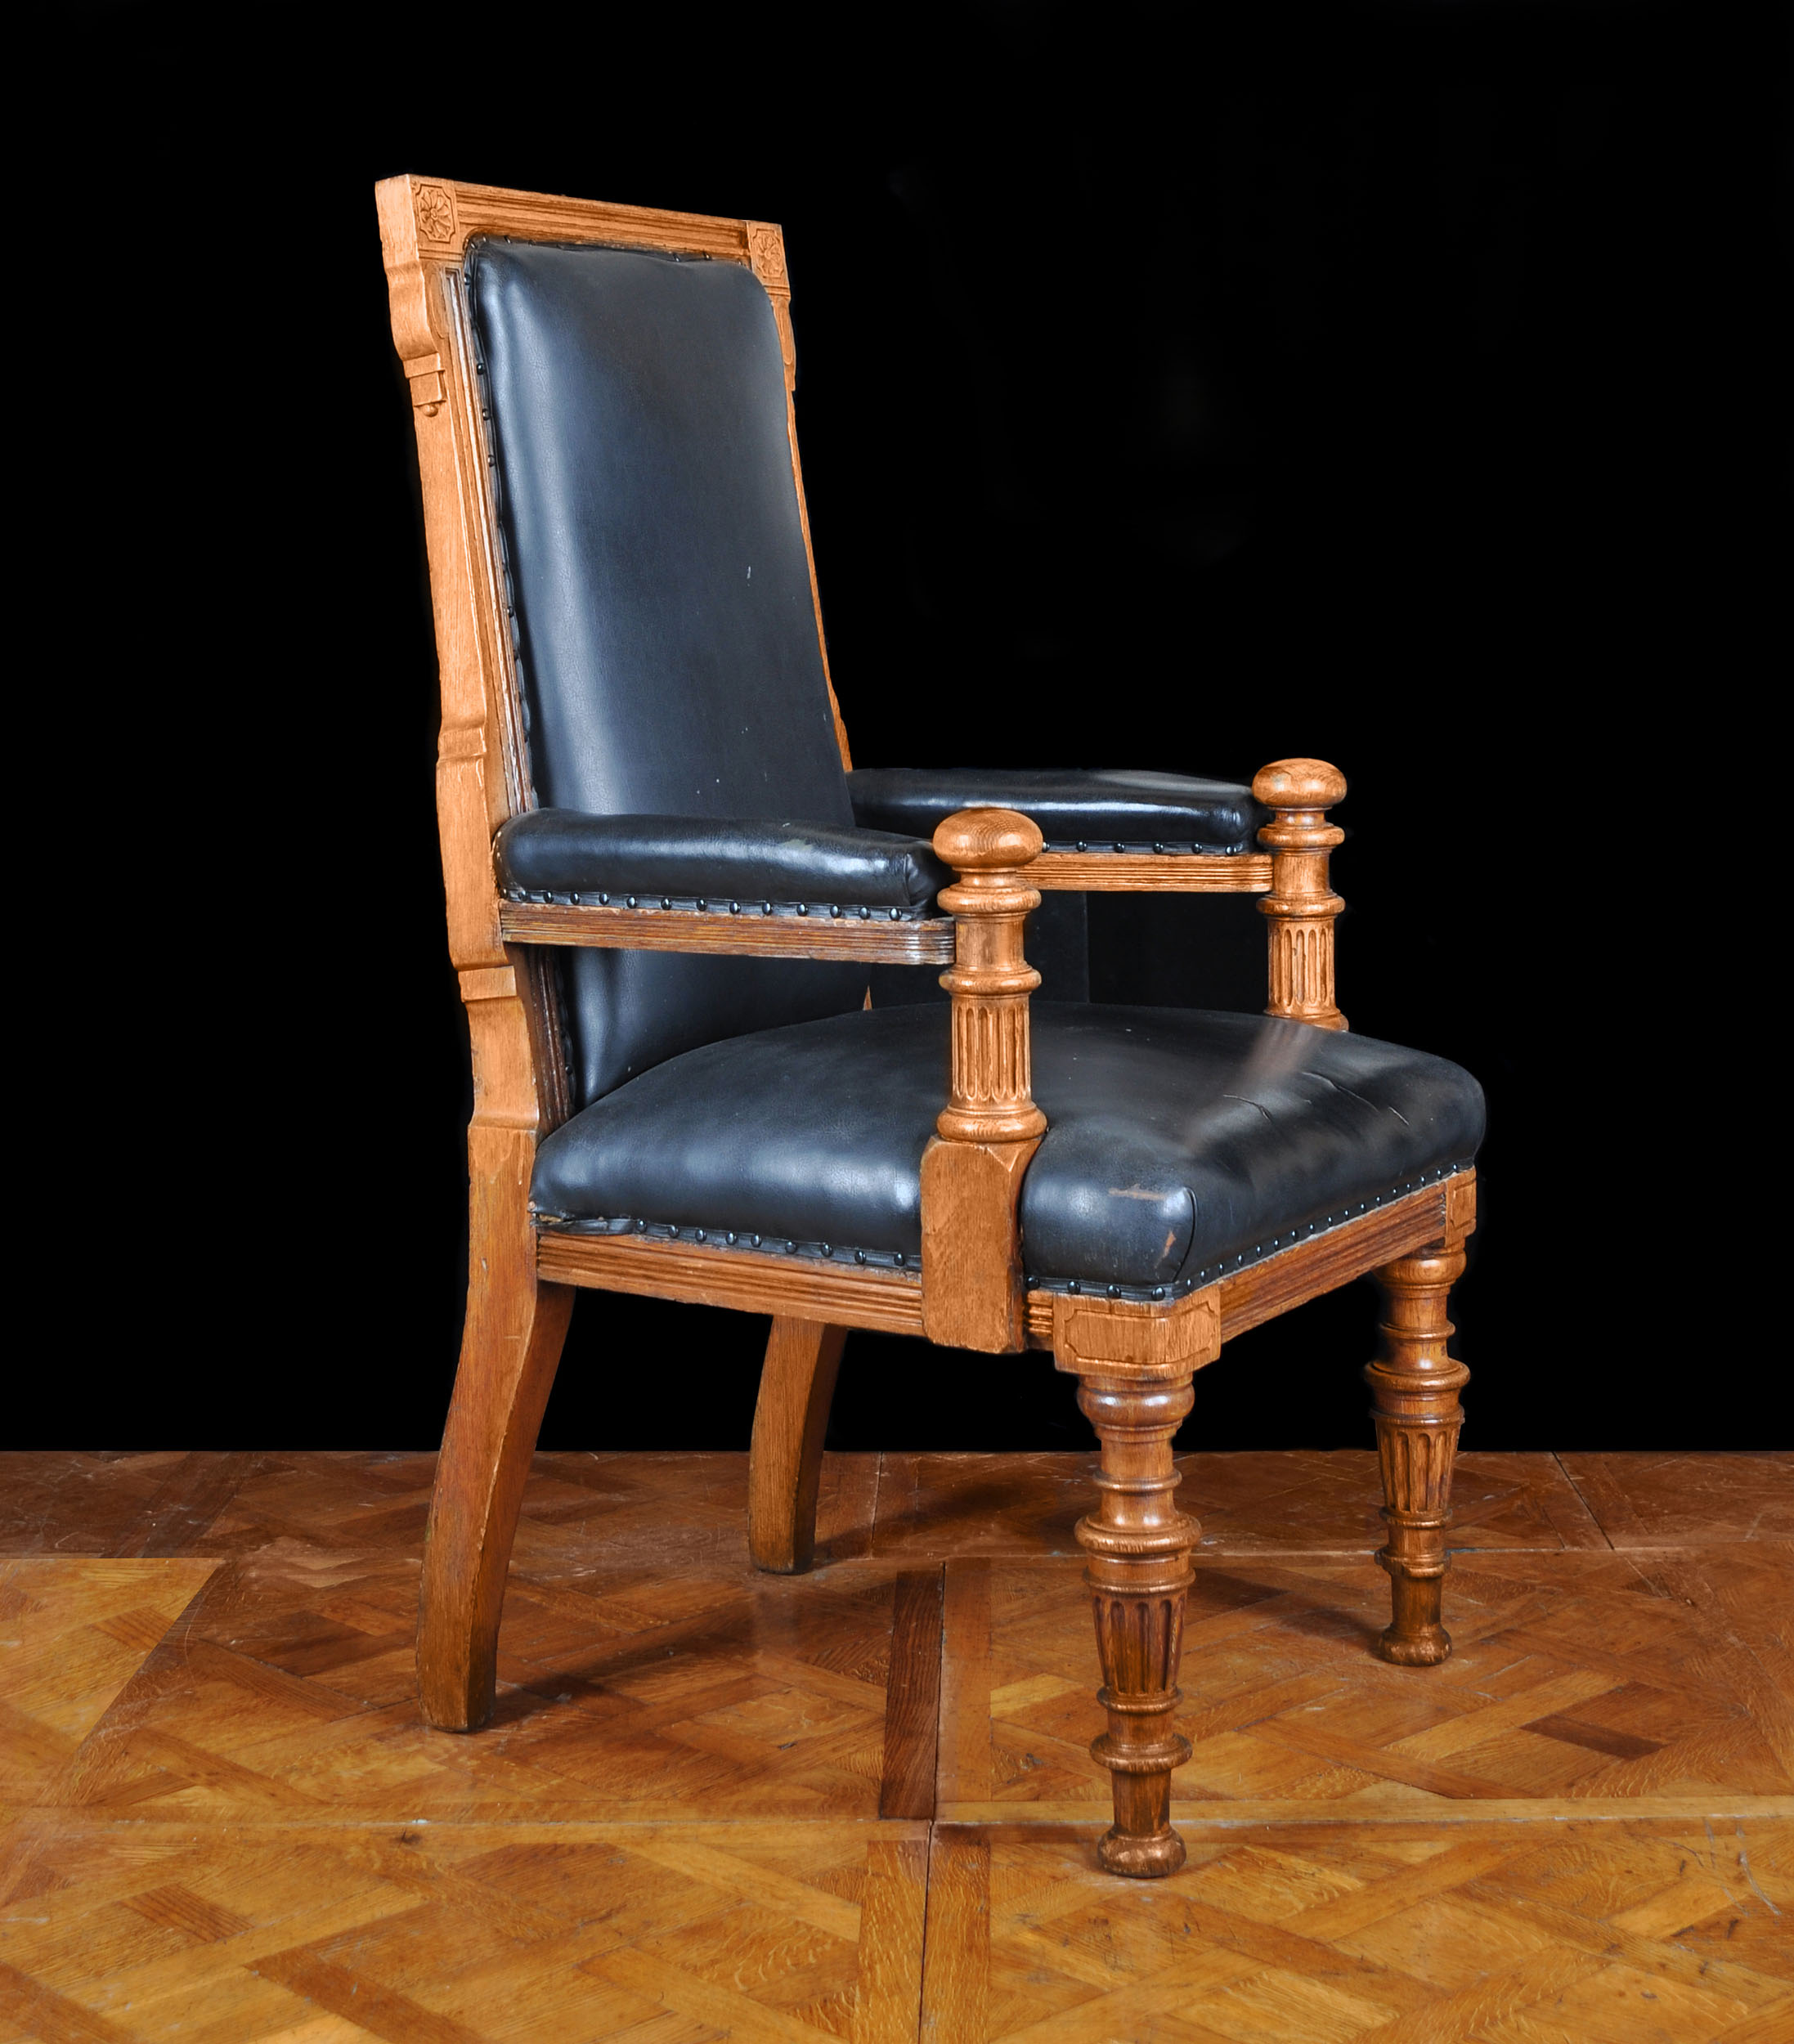 A Large Oak Victorian Magistrates Chair